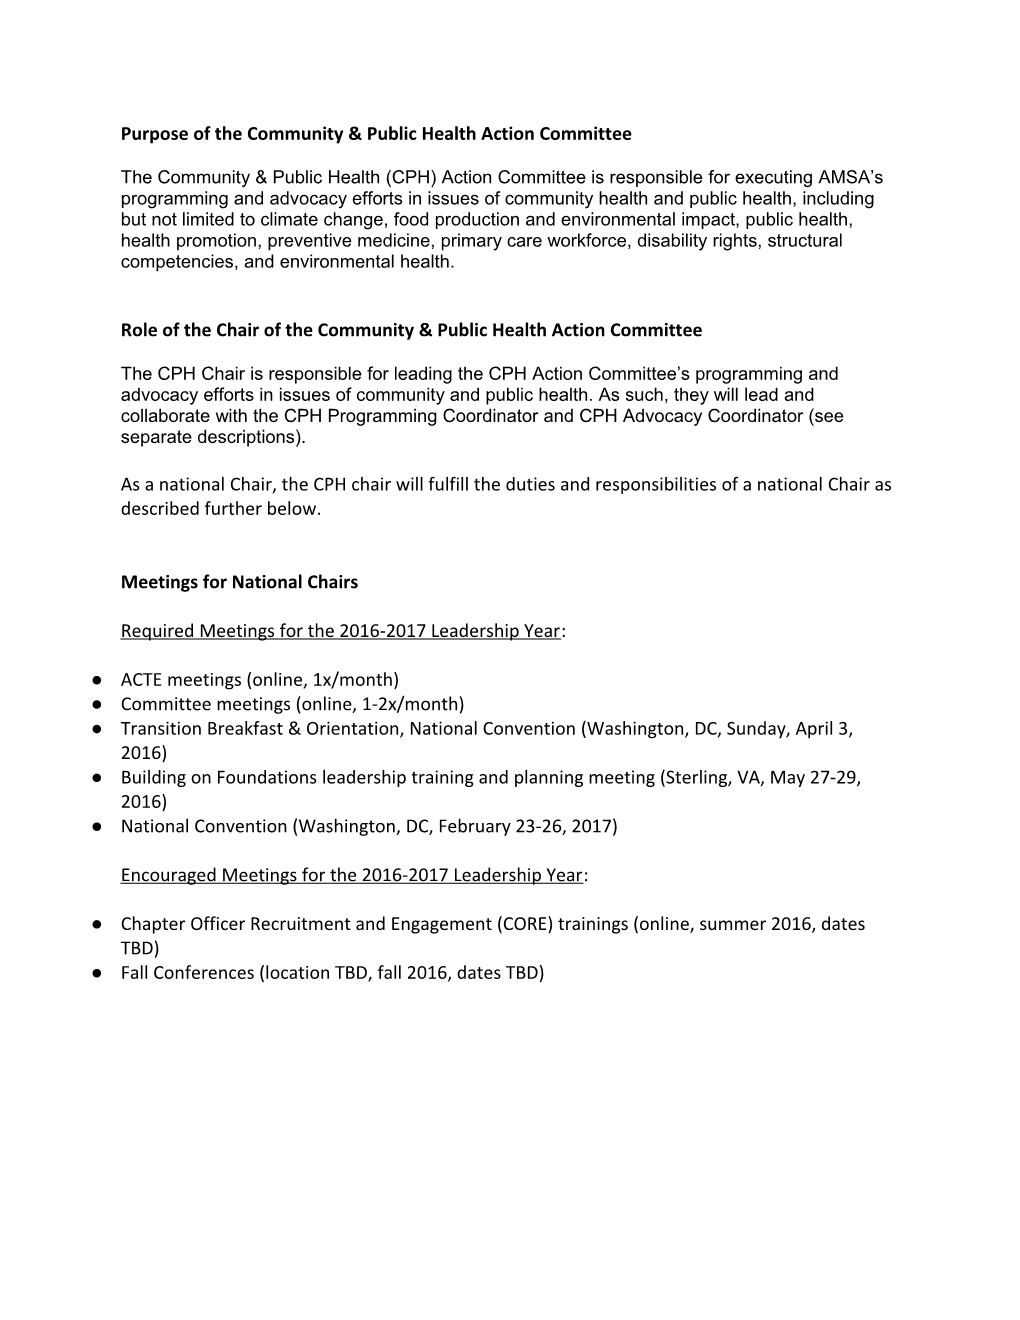 Purpose of the Community & Public Health Action Committee